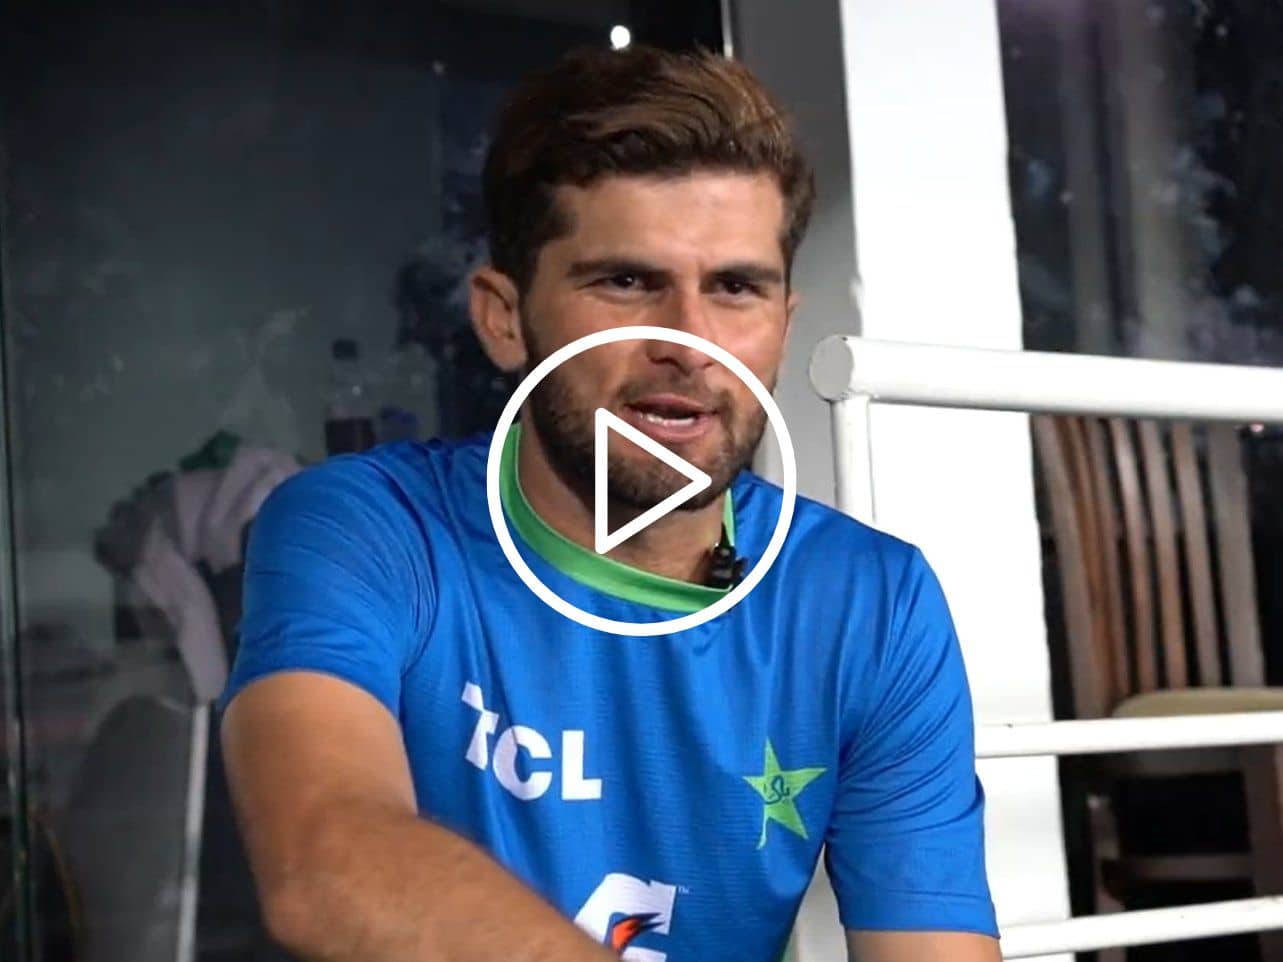 [Watch] Shaheen Afridi Gets Teased by Fans During India vs Pakistan Match